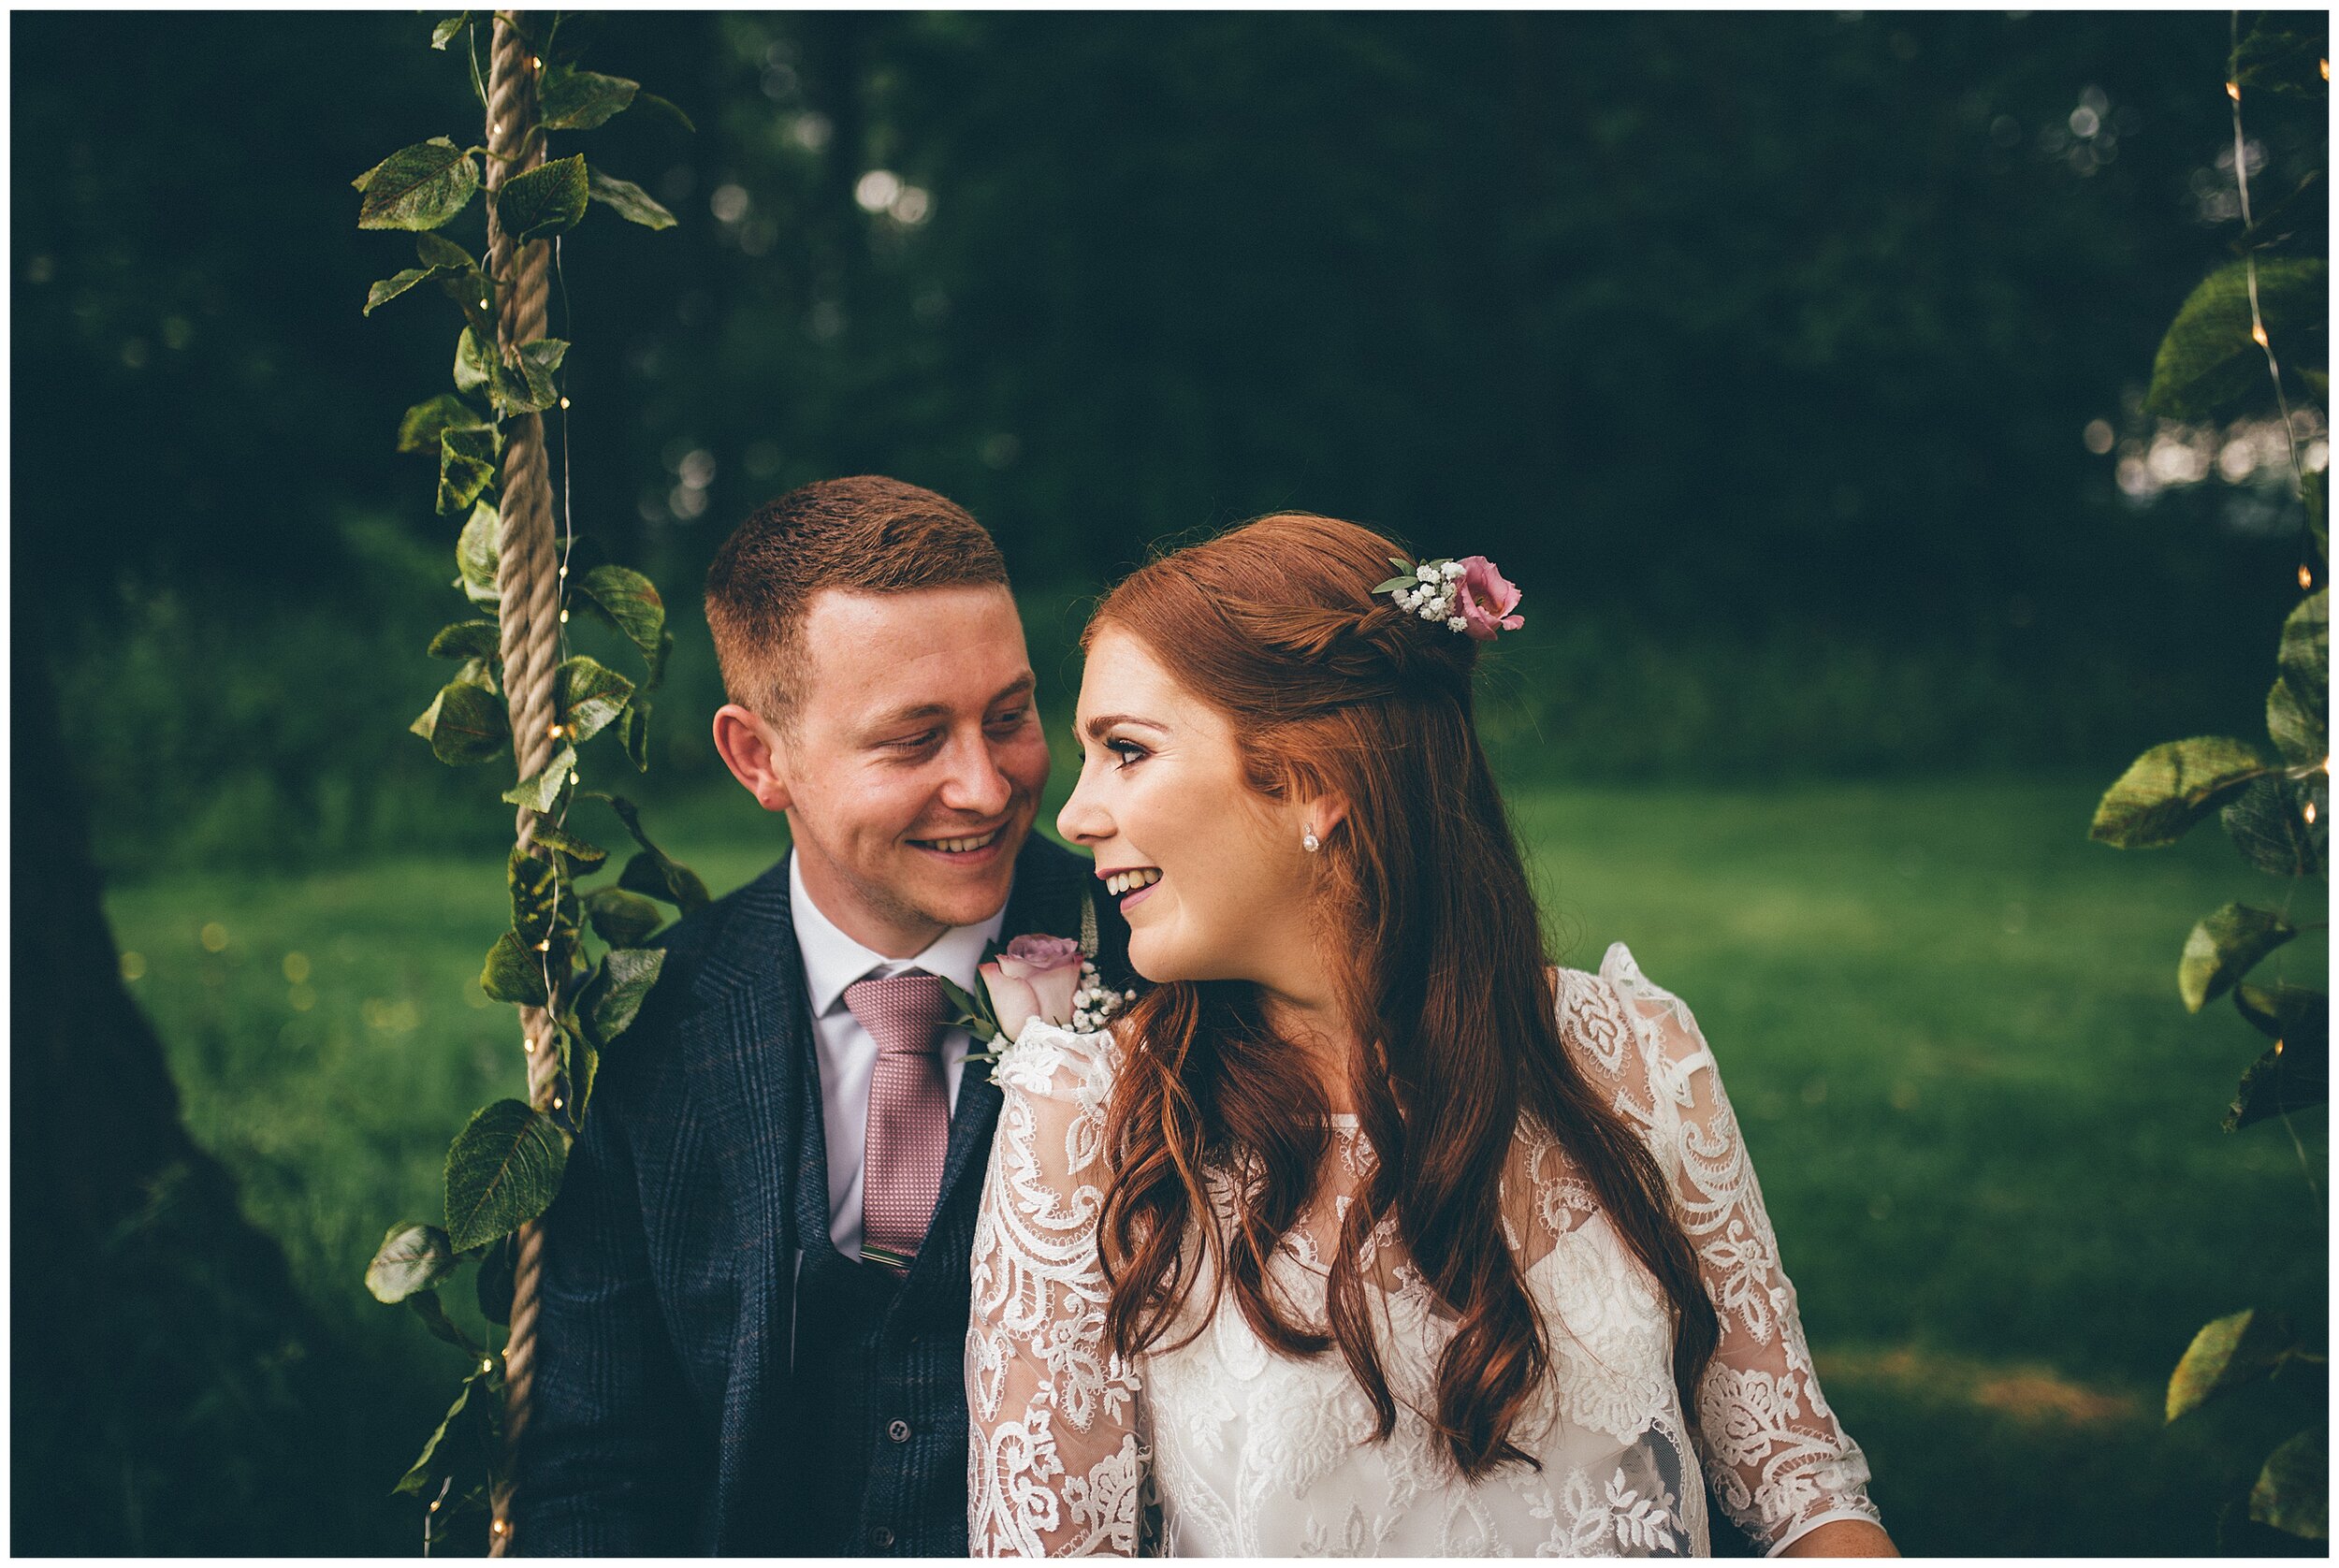 Bride and groom have their wedding portraits taken together in Cheshire venue in their spring wedding.